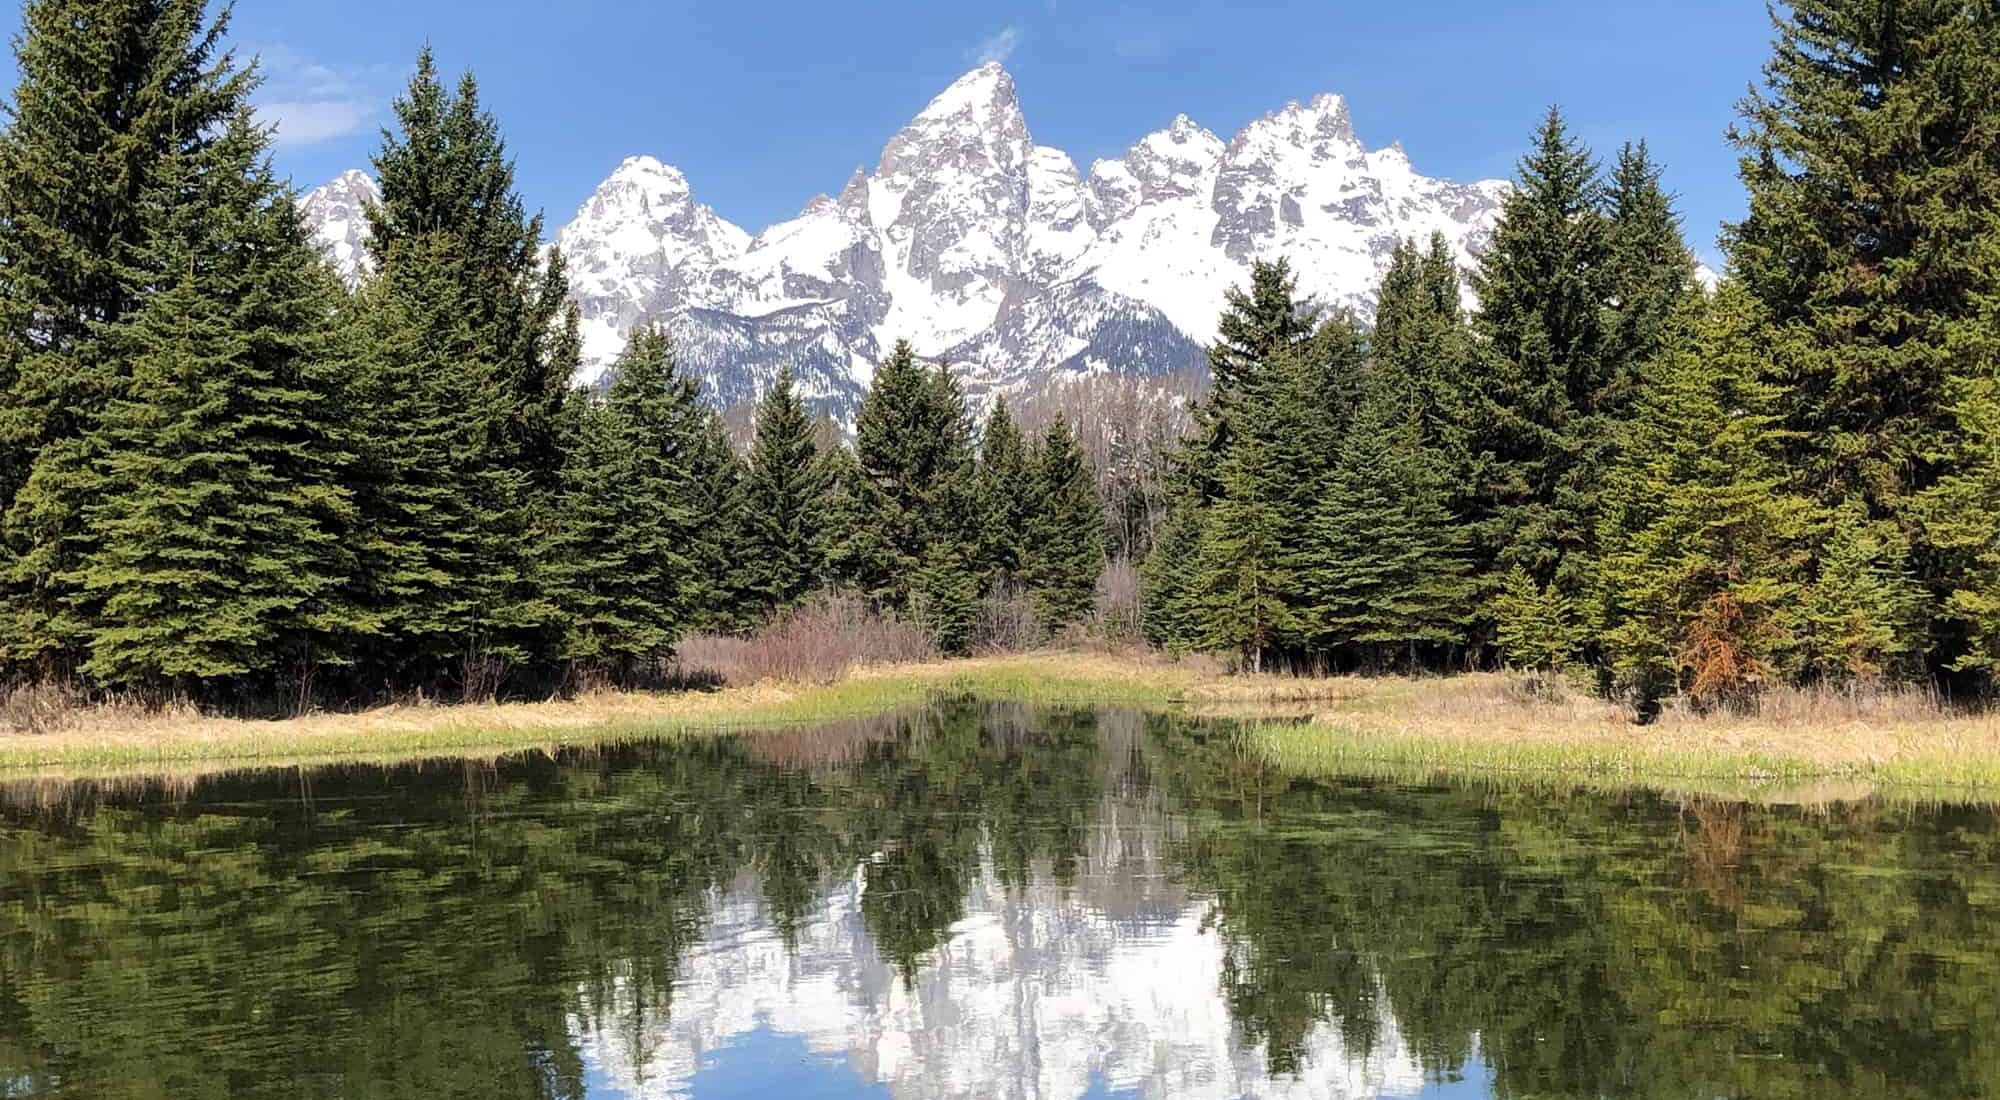 Three mountain peaks covered in spotty snow in the background; pine trees on the sides and in front of the mountains. Pond in the foreground with mountains and trees reflected in the pond